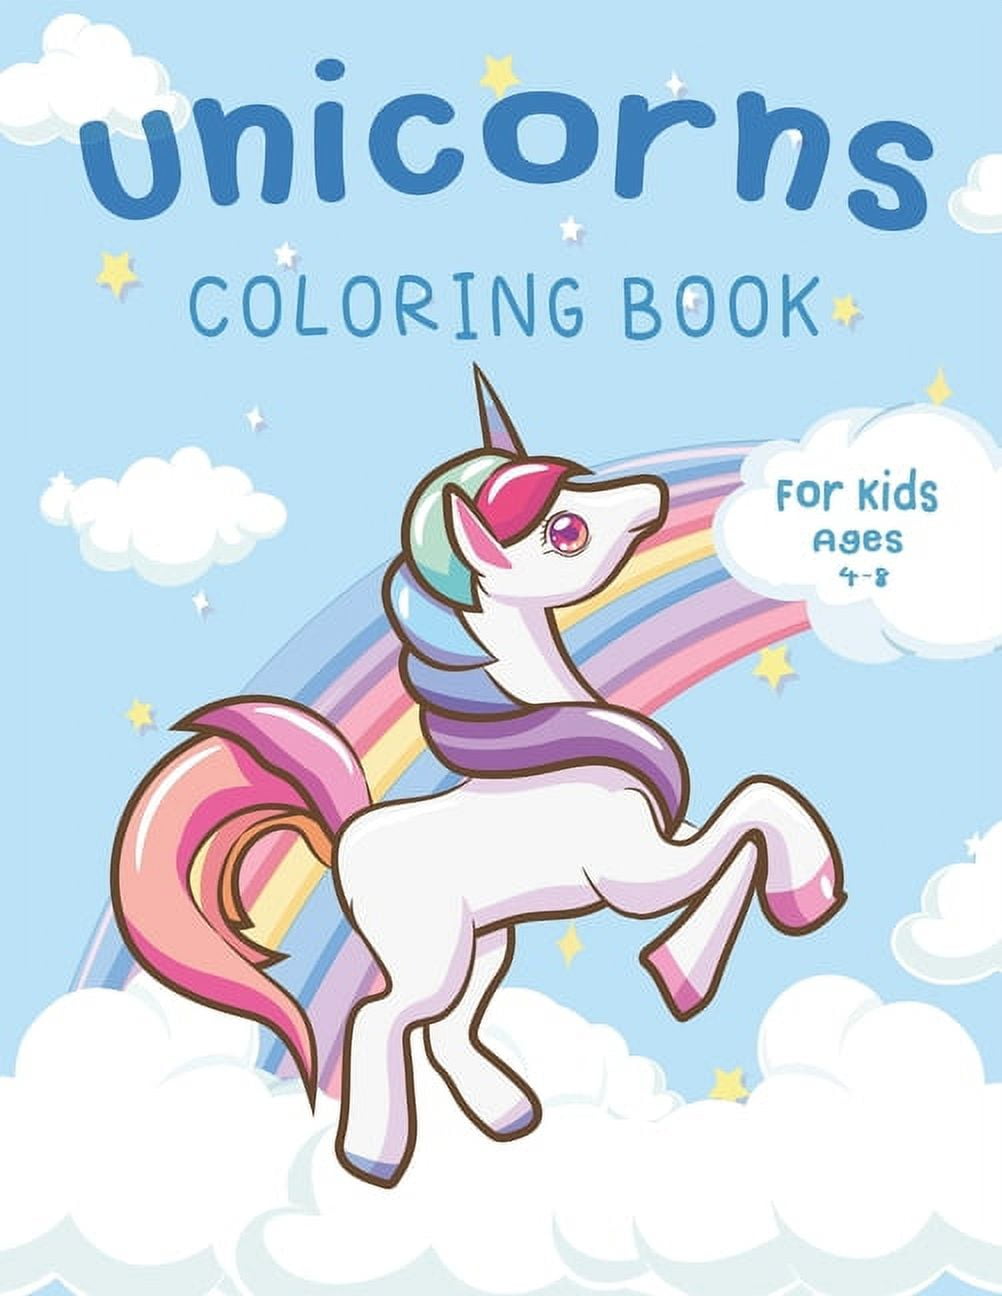 Unicorn Color by Numbers for Kids Ages 4-8: Unicorn Coloring Book for Kids and Educational Activity Books for Kids [Book]